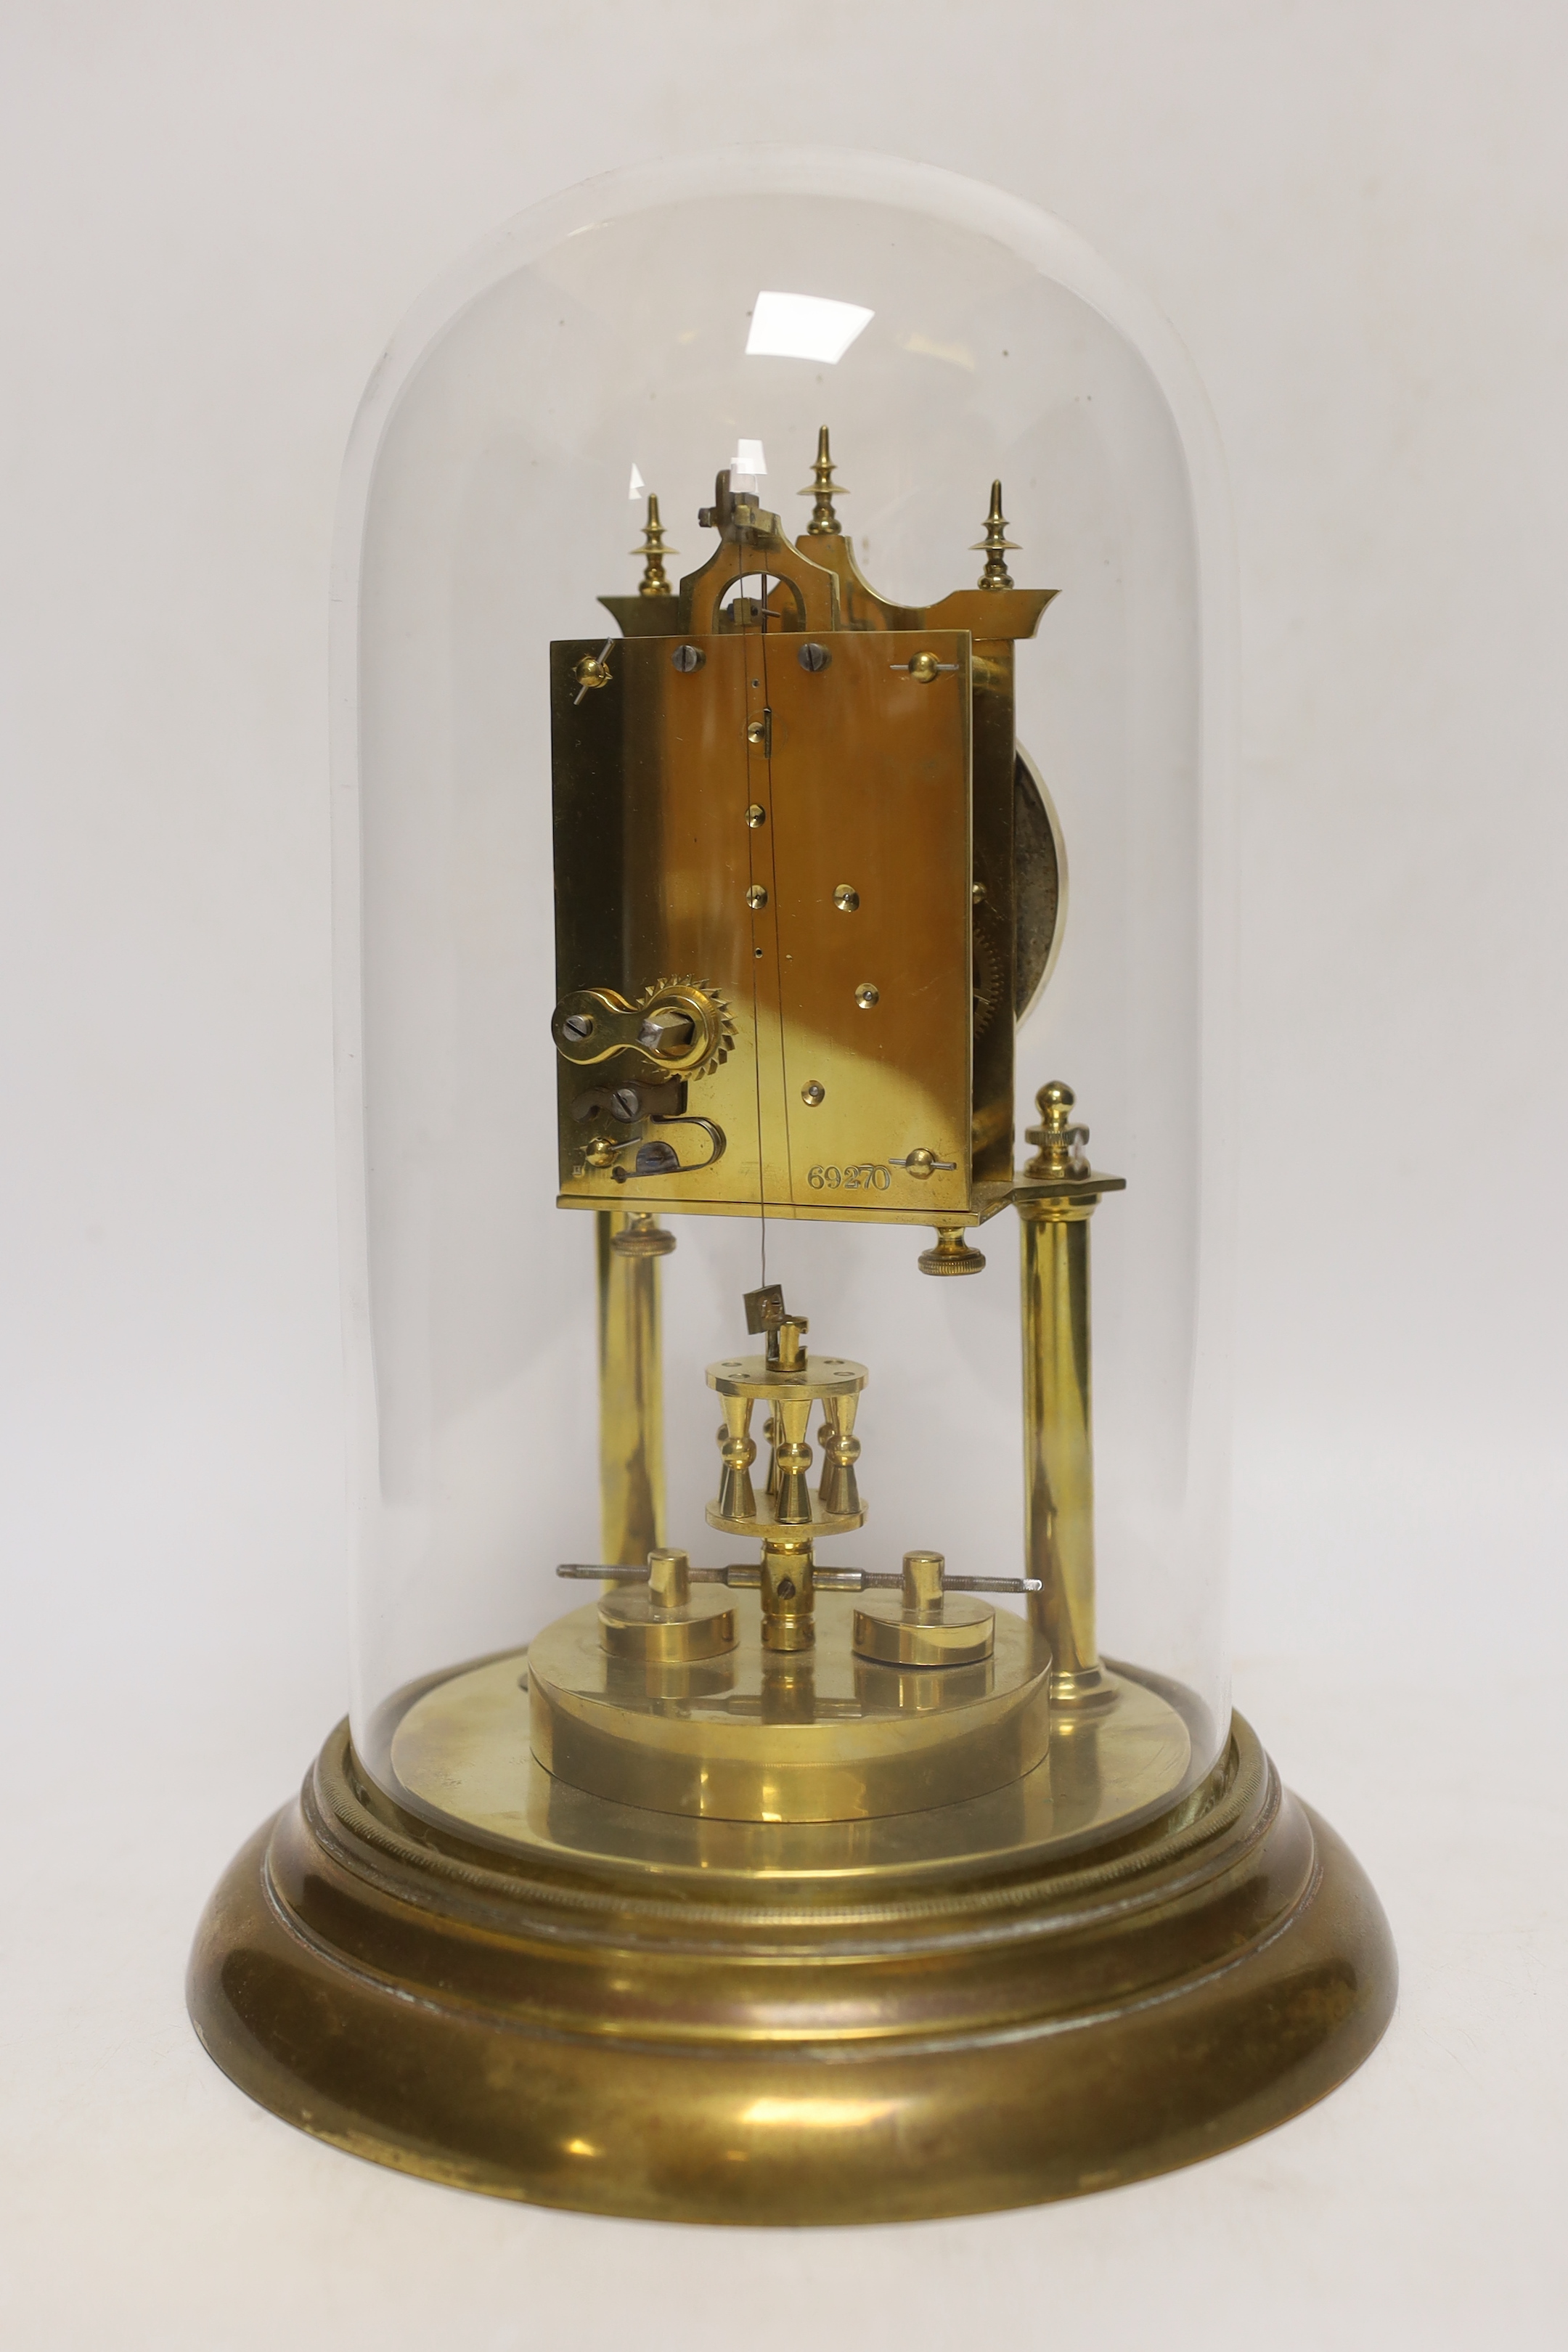 An early 20th century clock under a glass dome, 27cm high